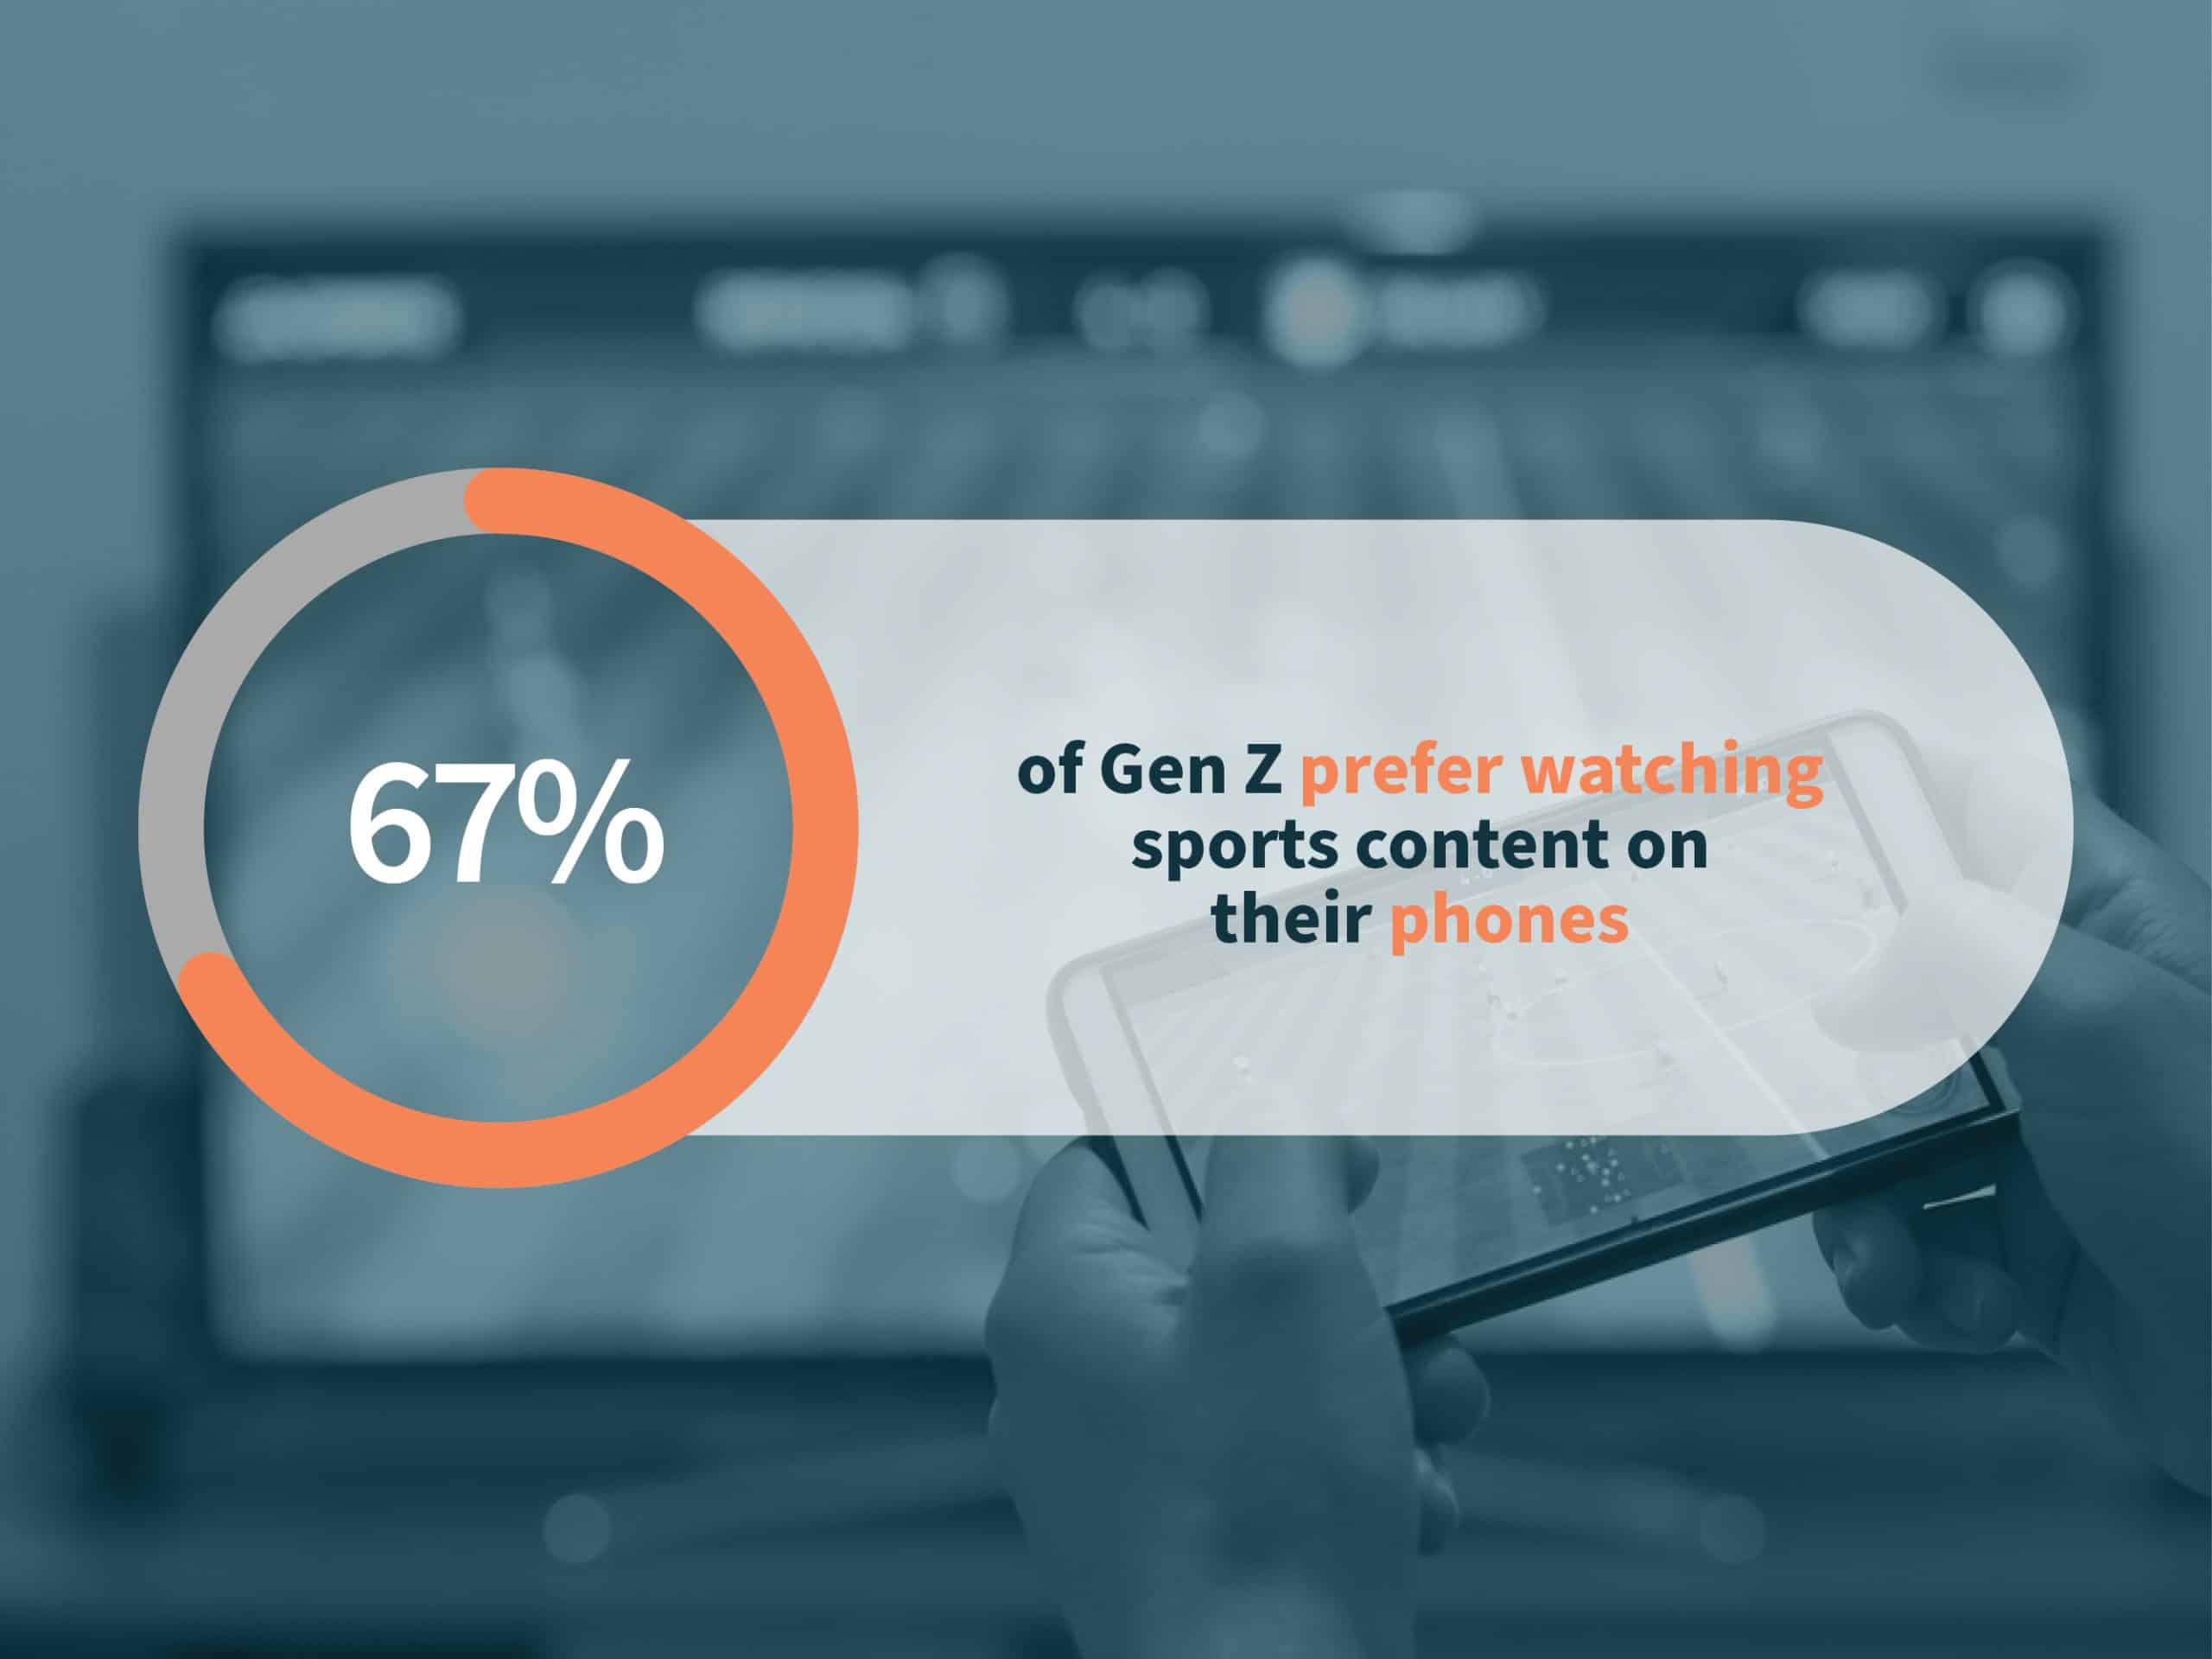 Sports viewer engagement survey infographic: 67% of Gen Z prefer watching sports content on their phones.